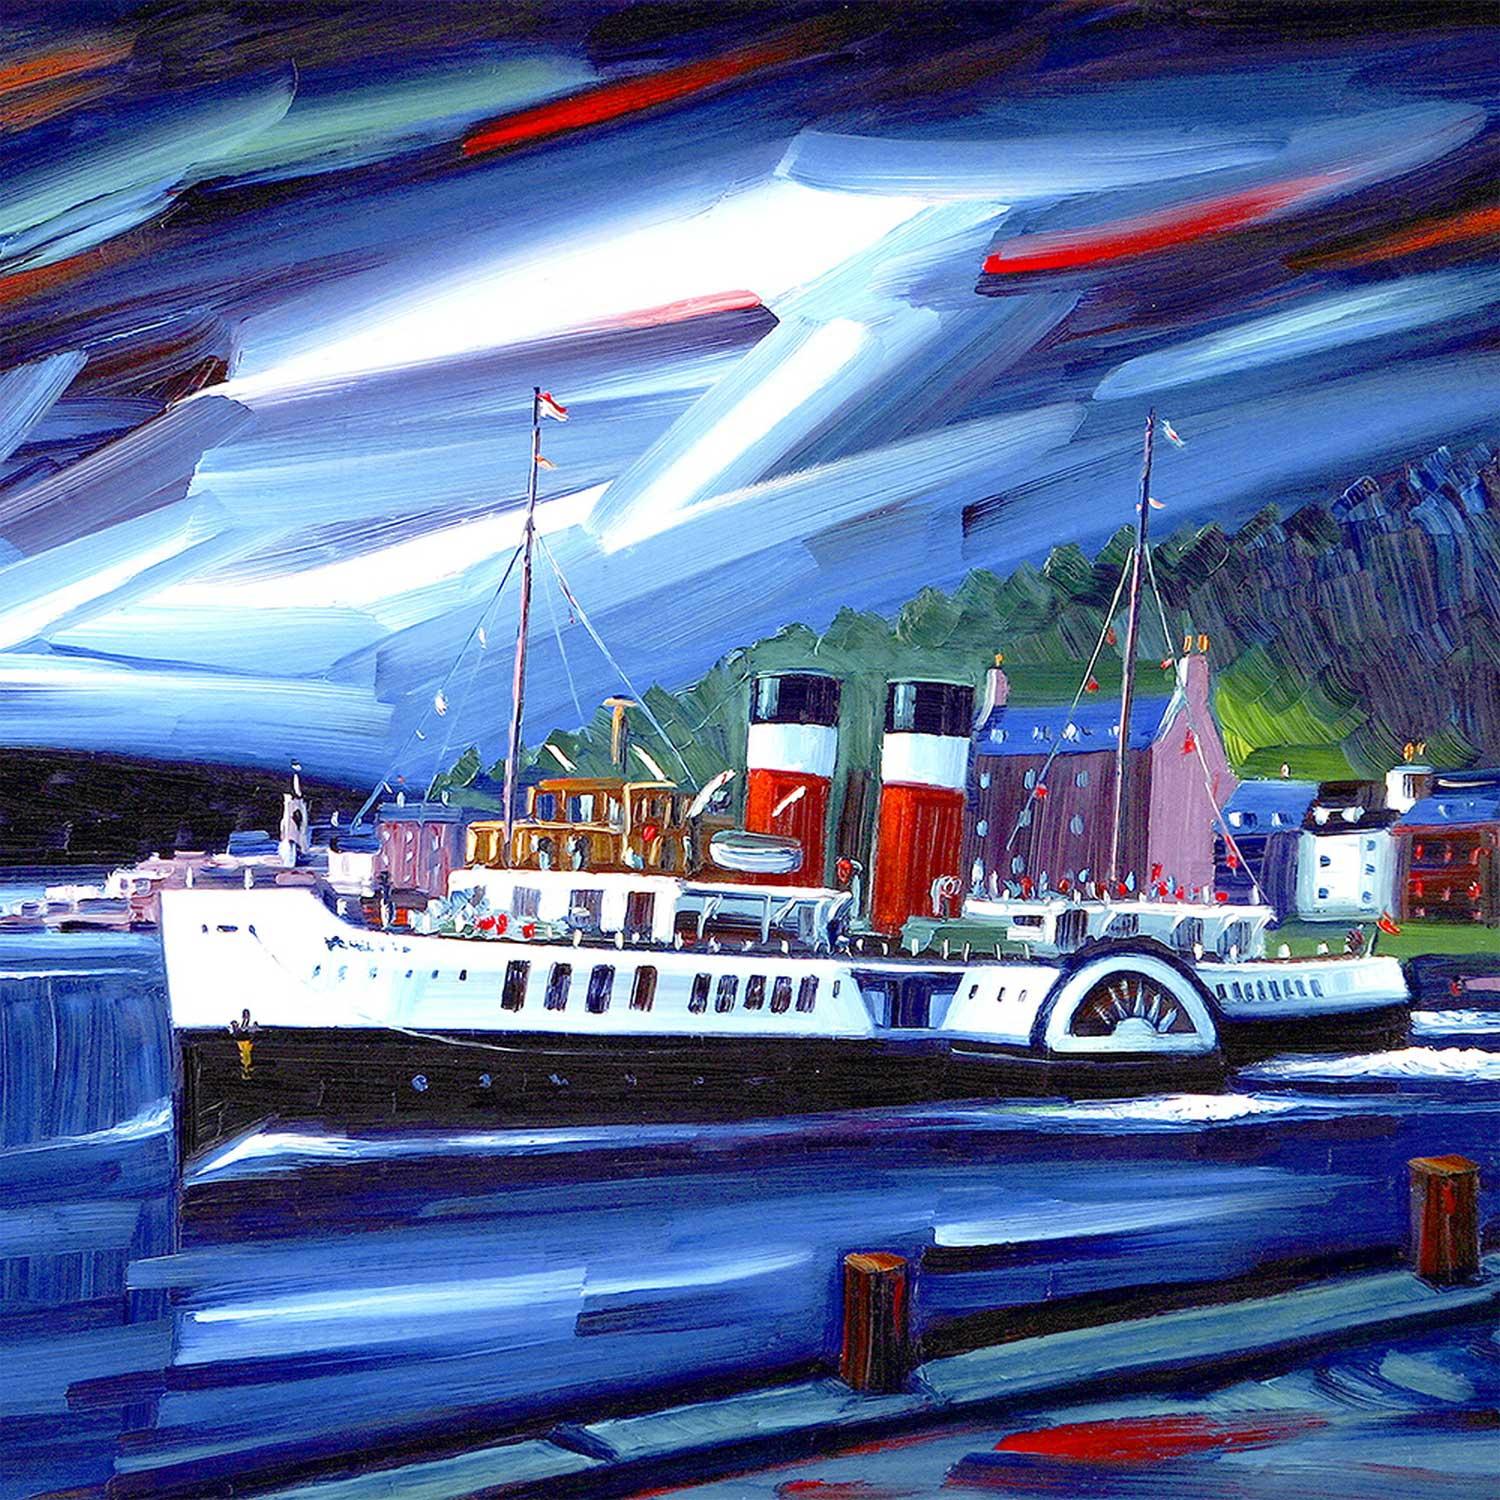 The Last Sea Going Paddle Steamer by artist Raymond Murray